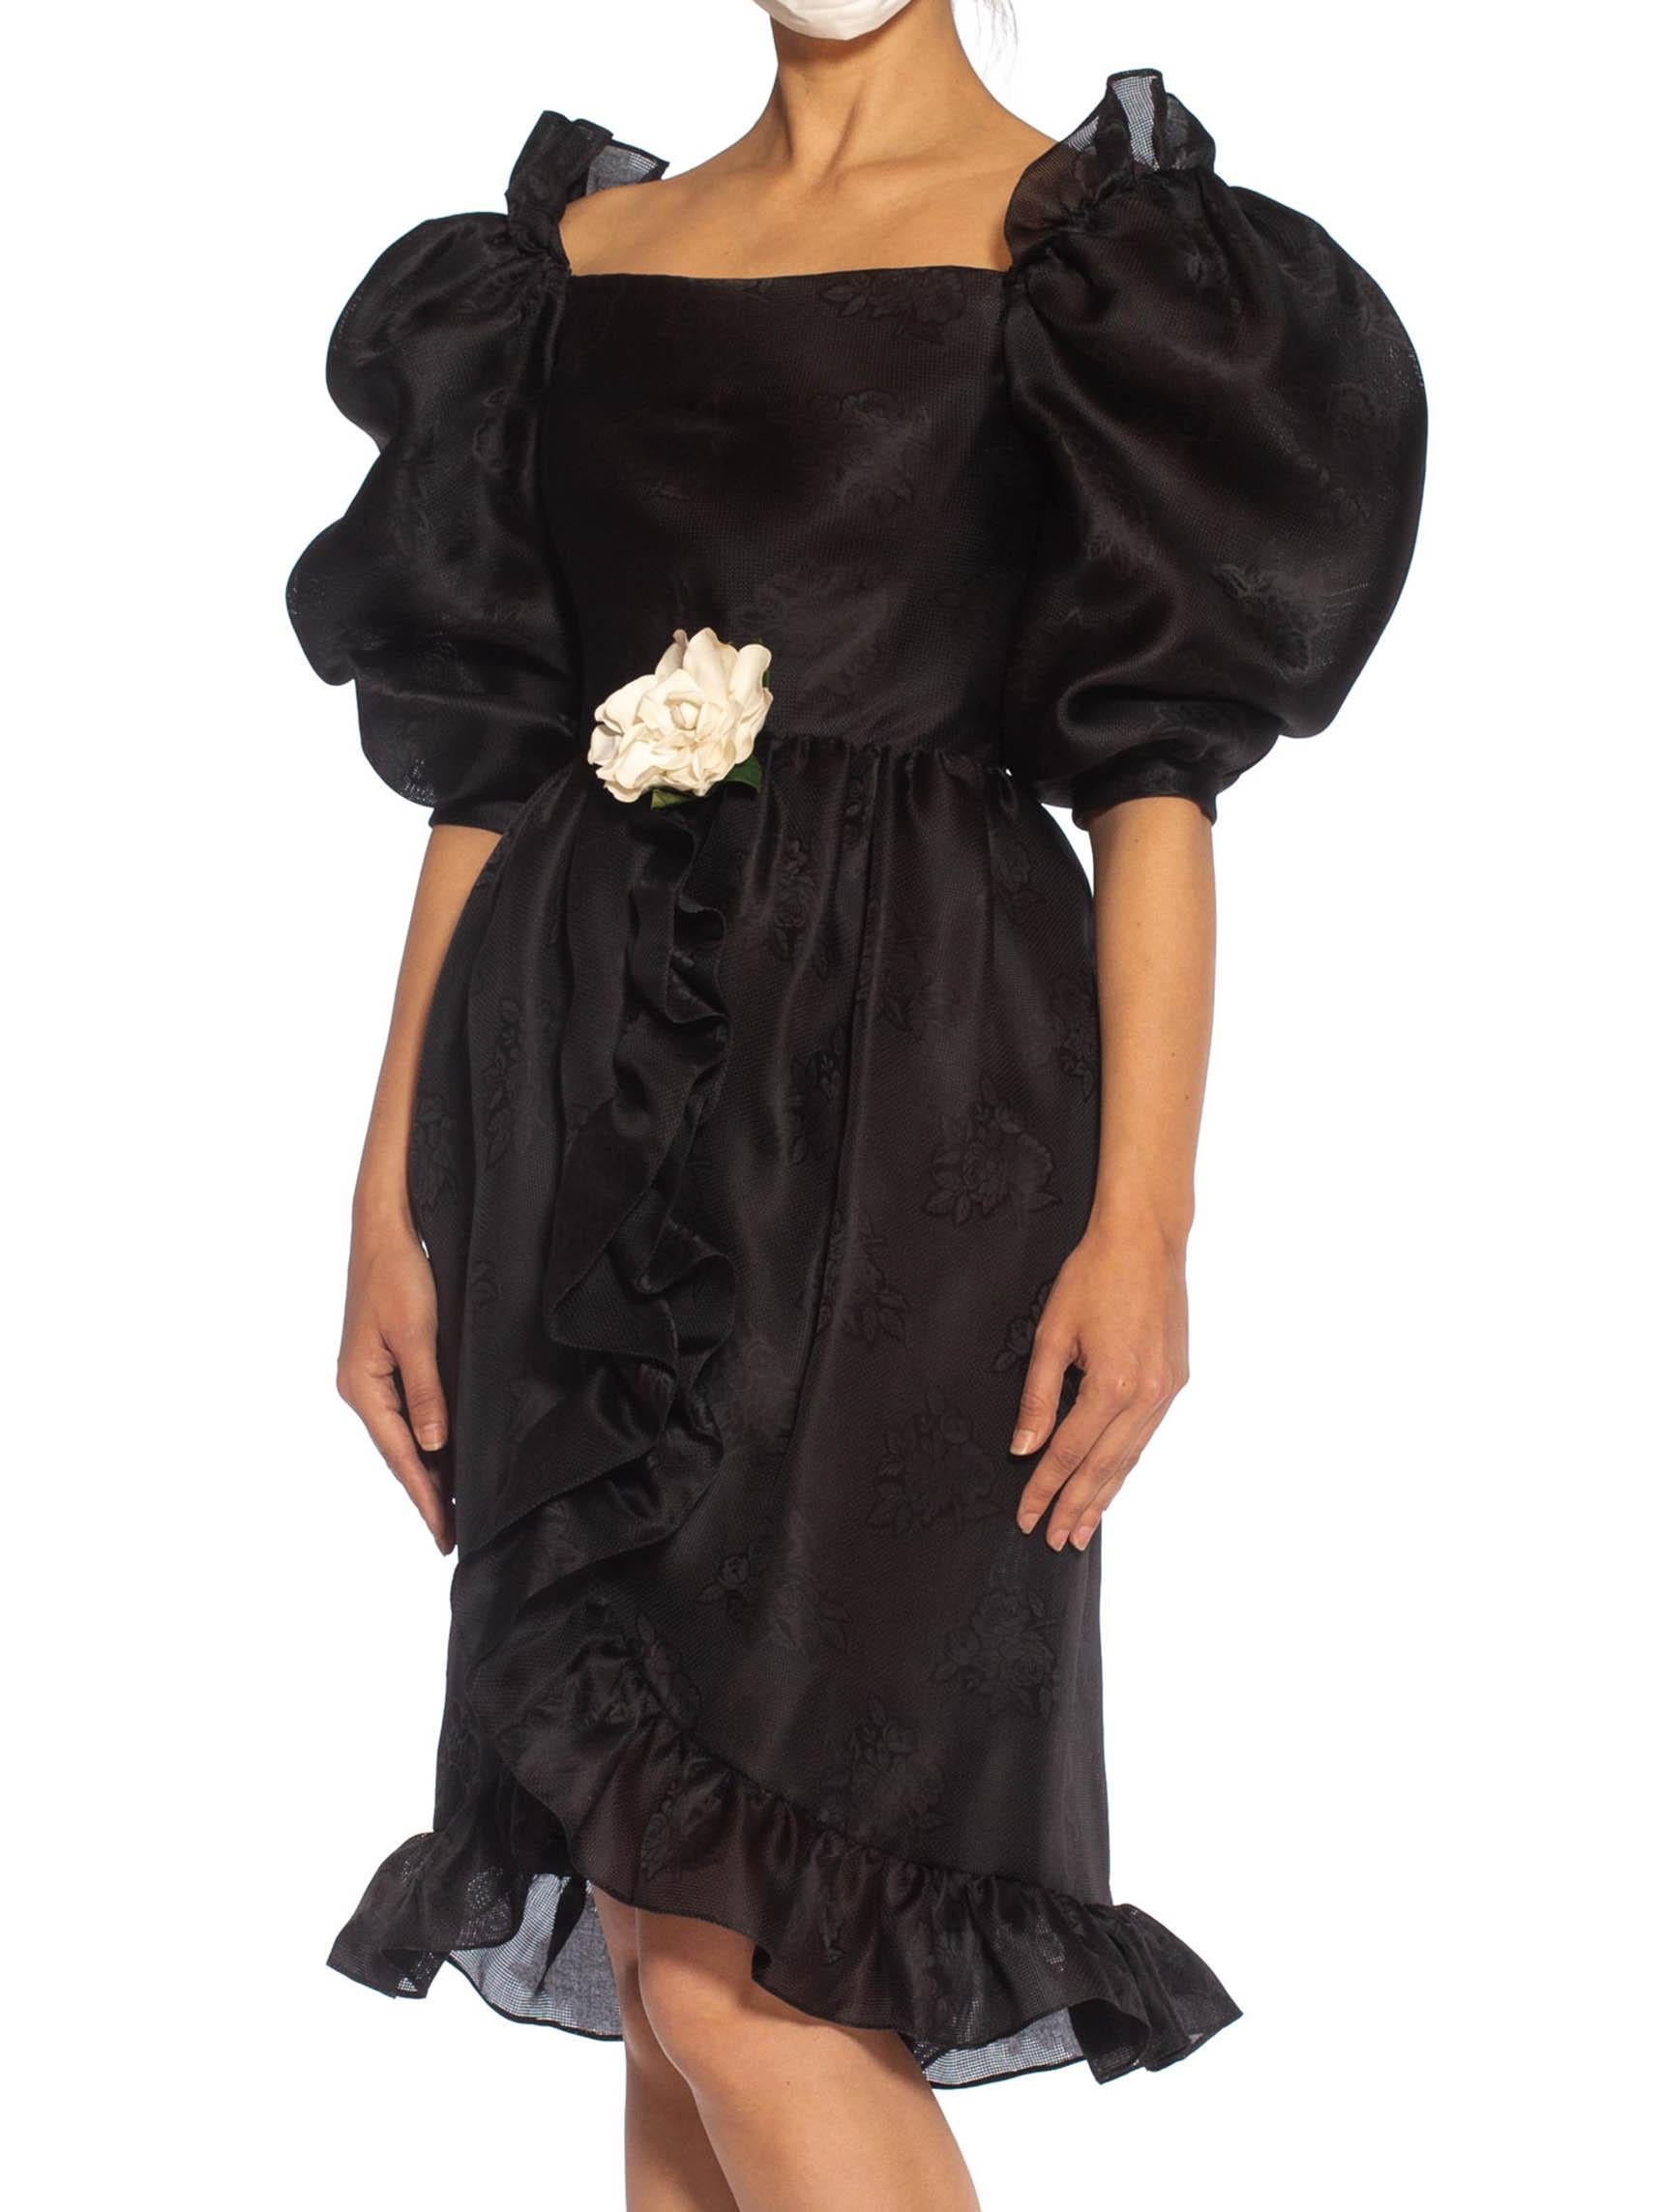 1980S GIVENCHY Haute Couture Silk Poof Sleeved & Ruffled Cocktail Dress With A  In Excellent Condition For Sale In New York, NY